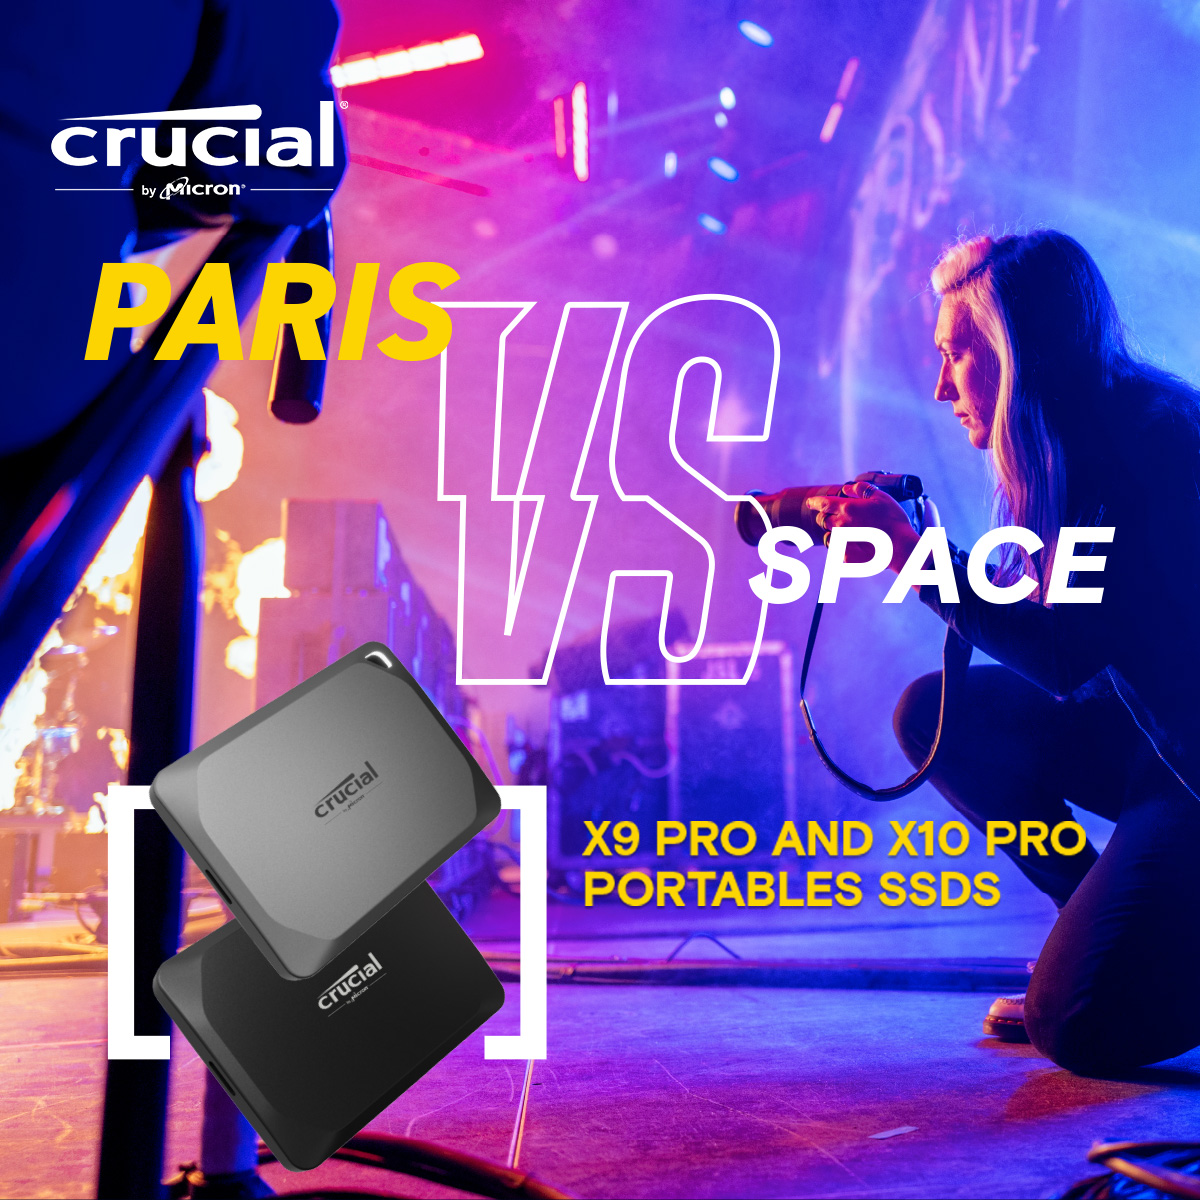 🚀 Elevate your storage game with Crucial X9 Pro & X10 Pro SSDs! ⚡ Experience lightning-fast speeds up to 1050MB/s for seamless data transfer. Compact, sleek, and built to go wherever you do! Get yours now at Newegg. 🛒newegg.io/9b61dea #Crucial #PortableSSD #Newegg